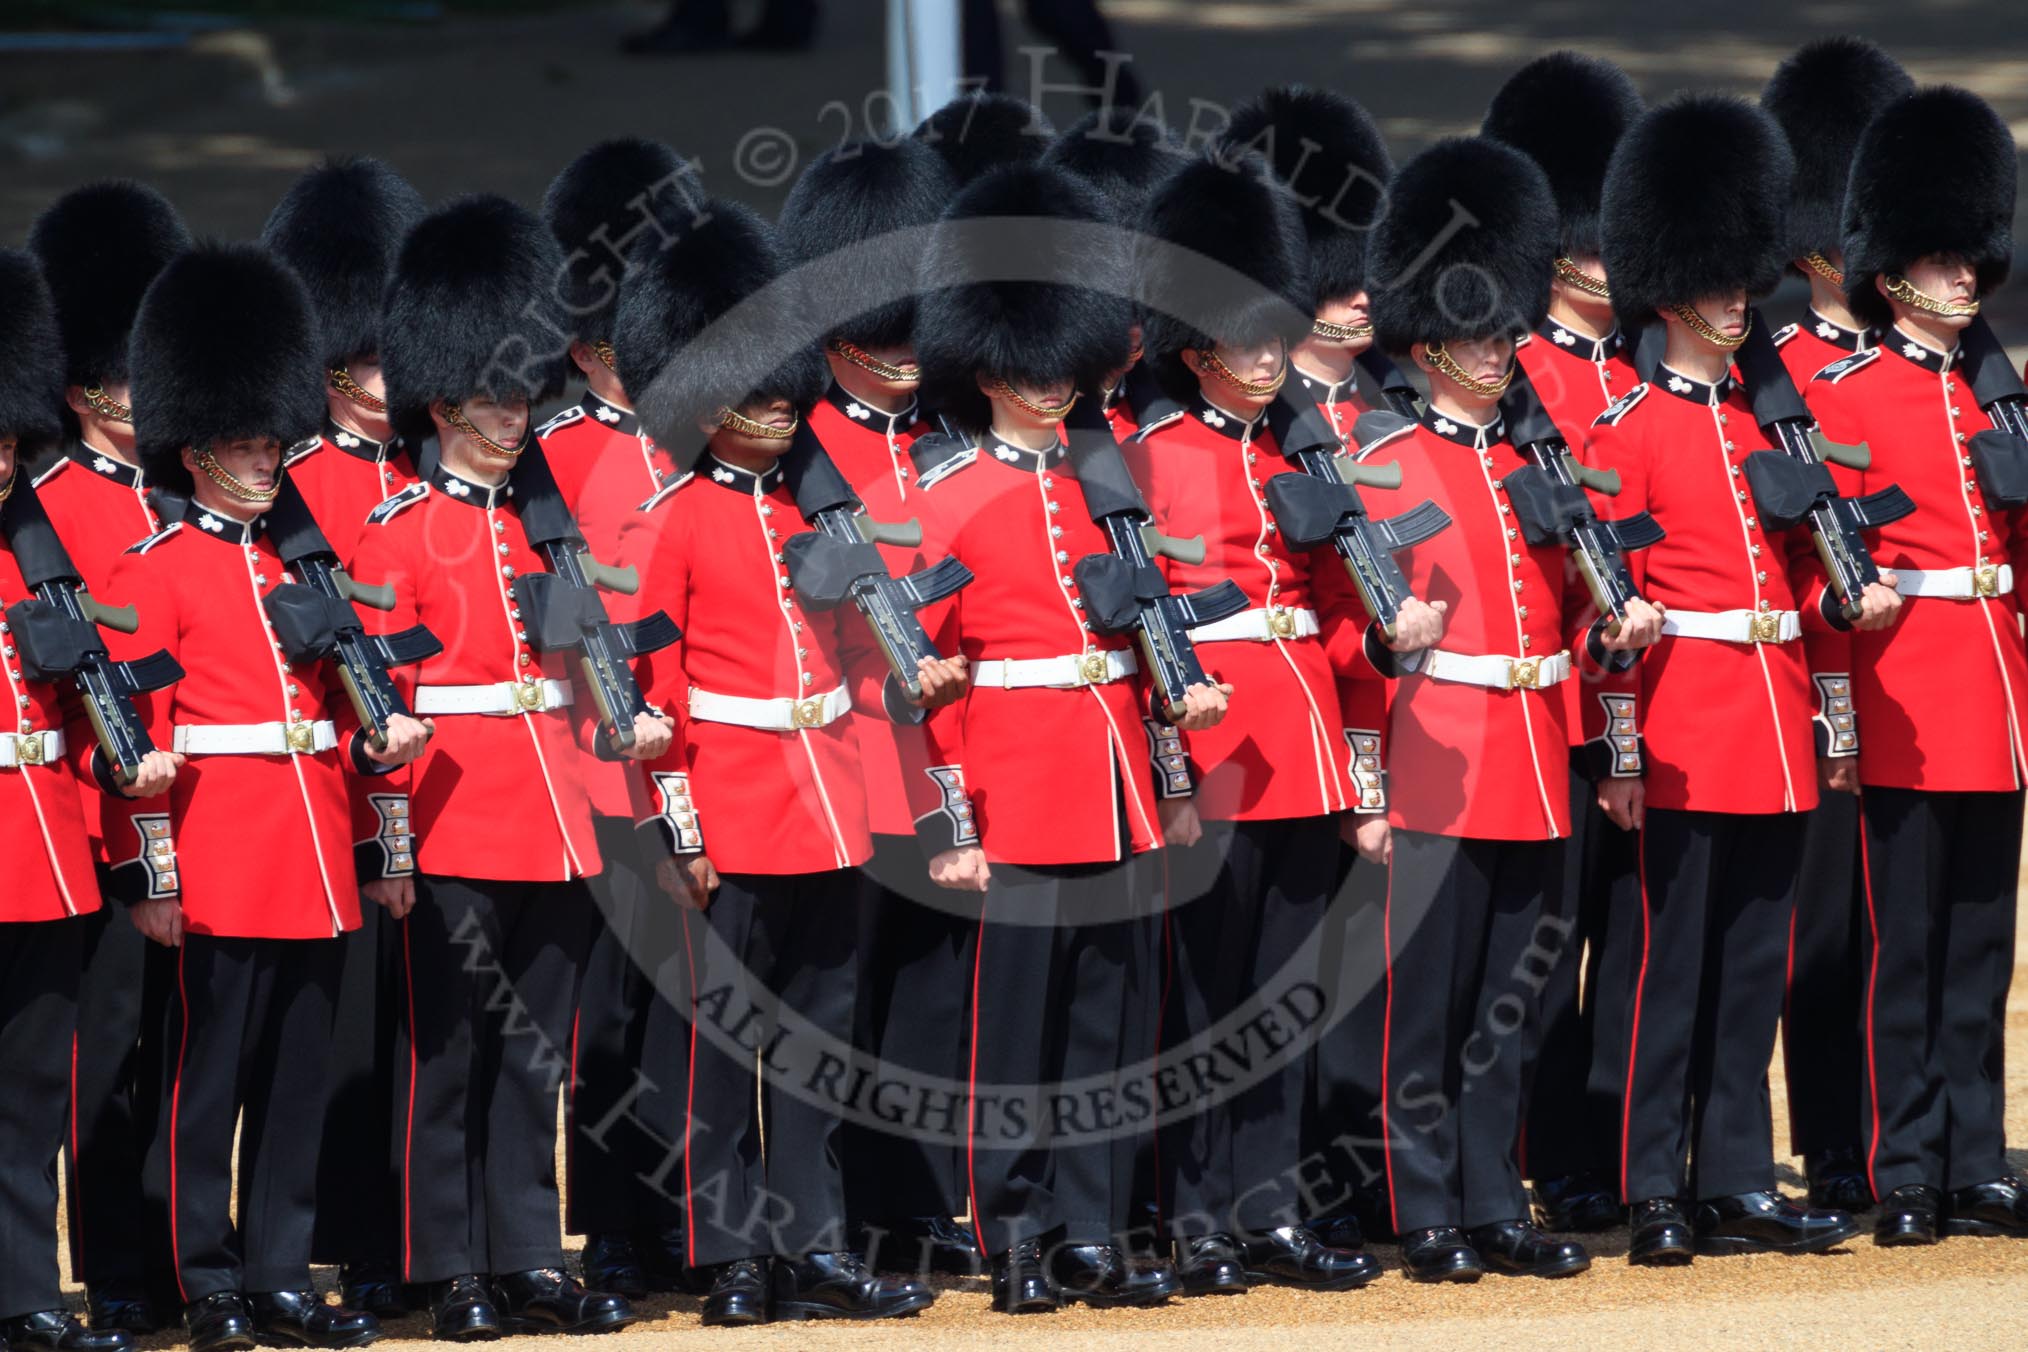 Number Five Guard, Nijmegen Company, Grenadier Guards after changing formation, during Trooping the Colour 2018, The Queen's Birthday Parade at Horse Guards Parade, Westminster, London, 9 June 2018, 10:37.